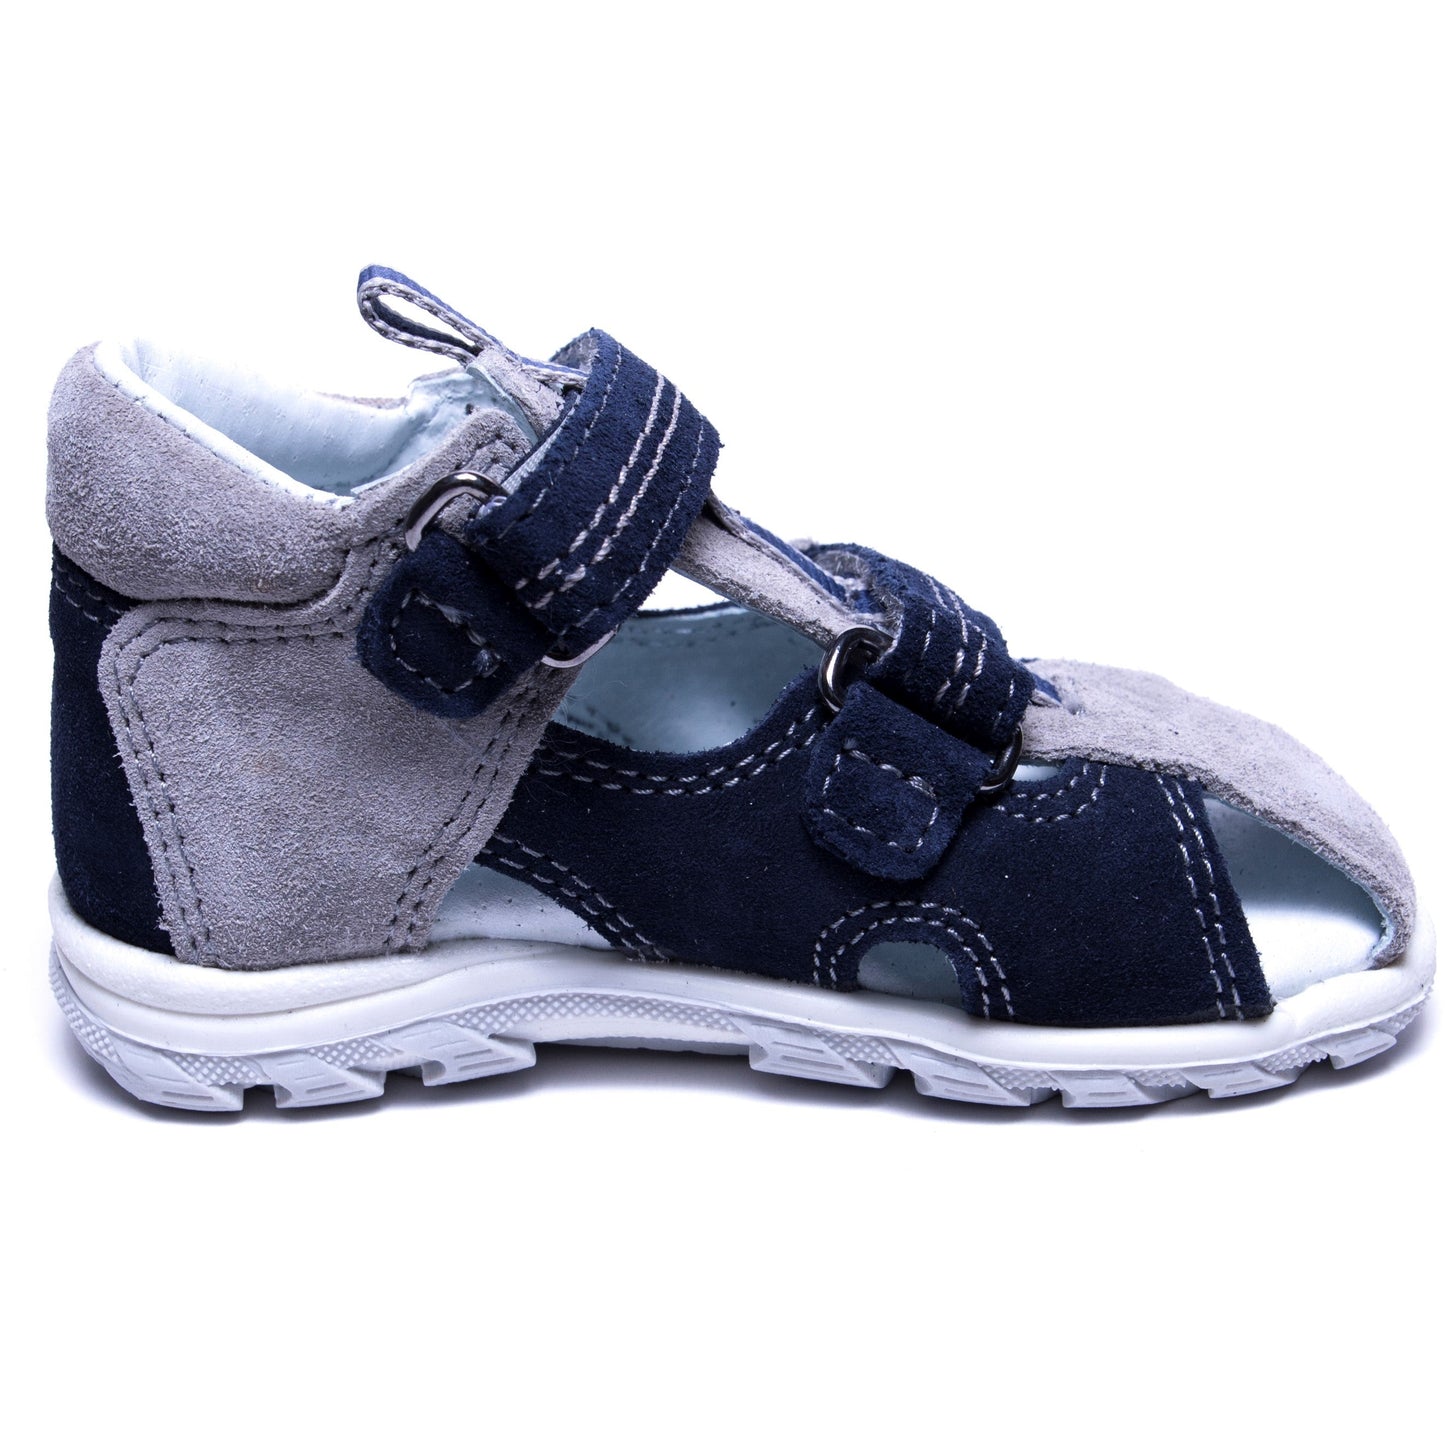 orthopedic toddler boy sandals: T102: color blue grey - feelgoodshoes.ae